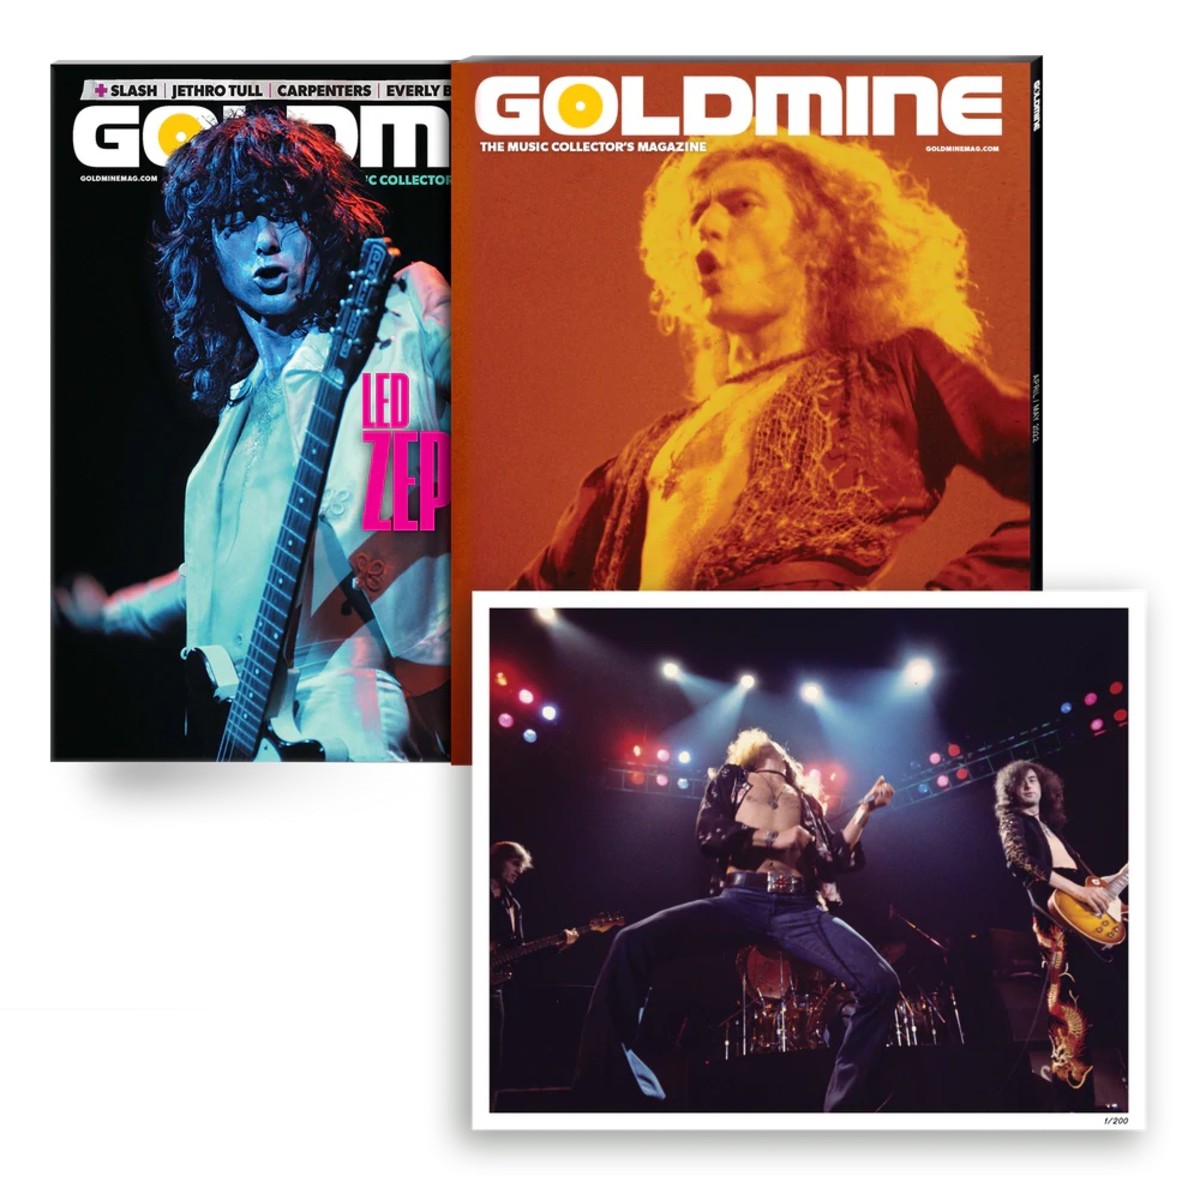 Collector's print edition of Goldmine's Led Zeppelin issue (only 200 made) with alternate cover and numbered 8x10 in a slipcase, photos taken from rare outtakes from photographer Neal Preston.